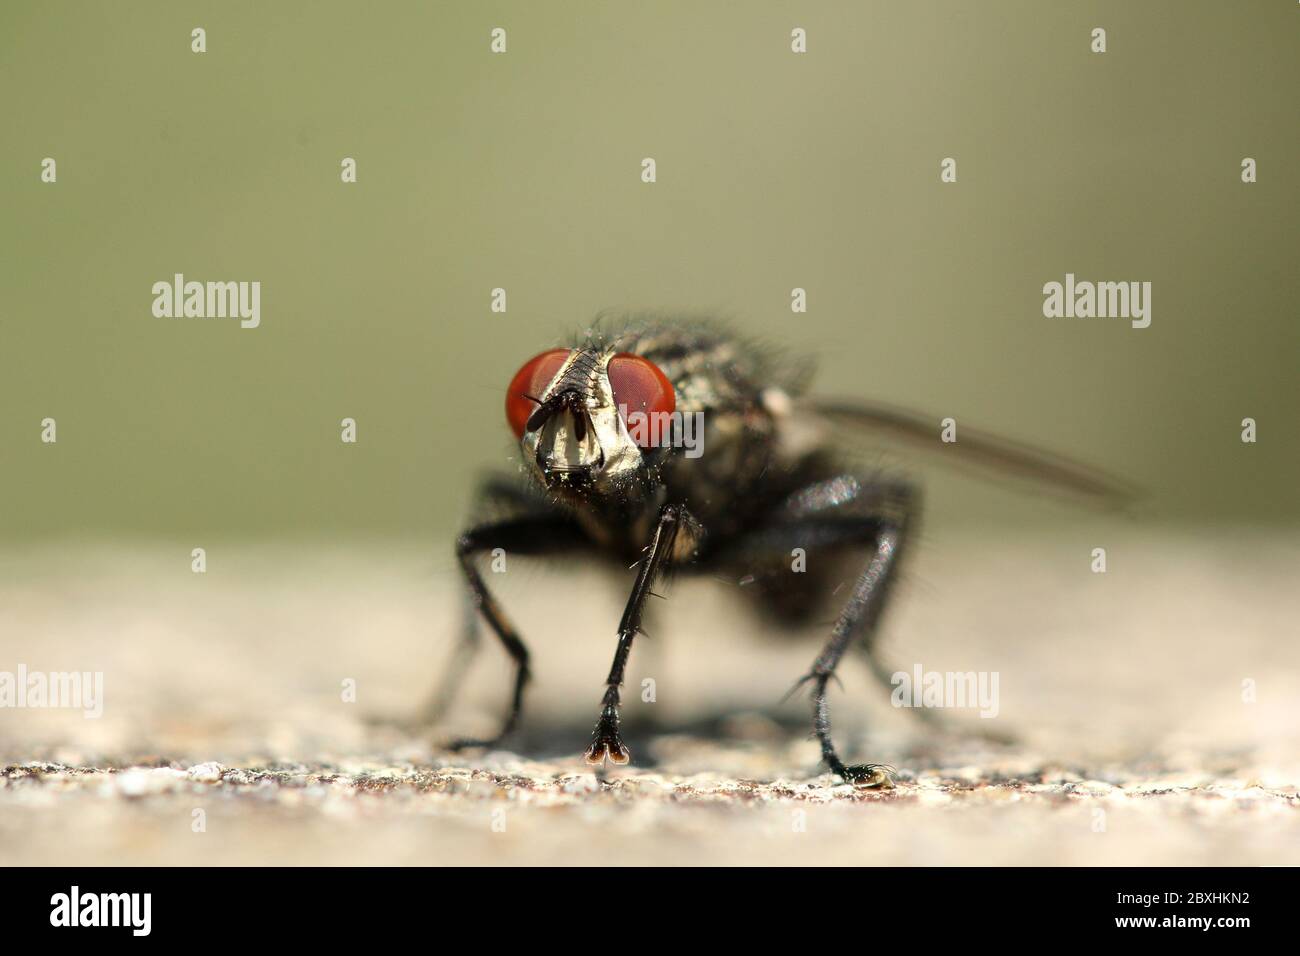 Sarcophagid (flesh) fly on wall against green background, England Stock Photo